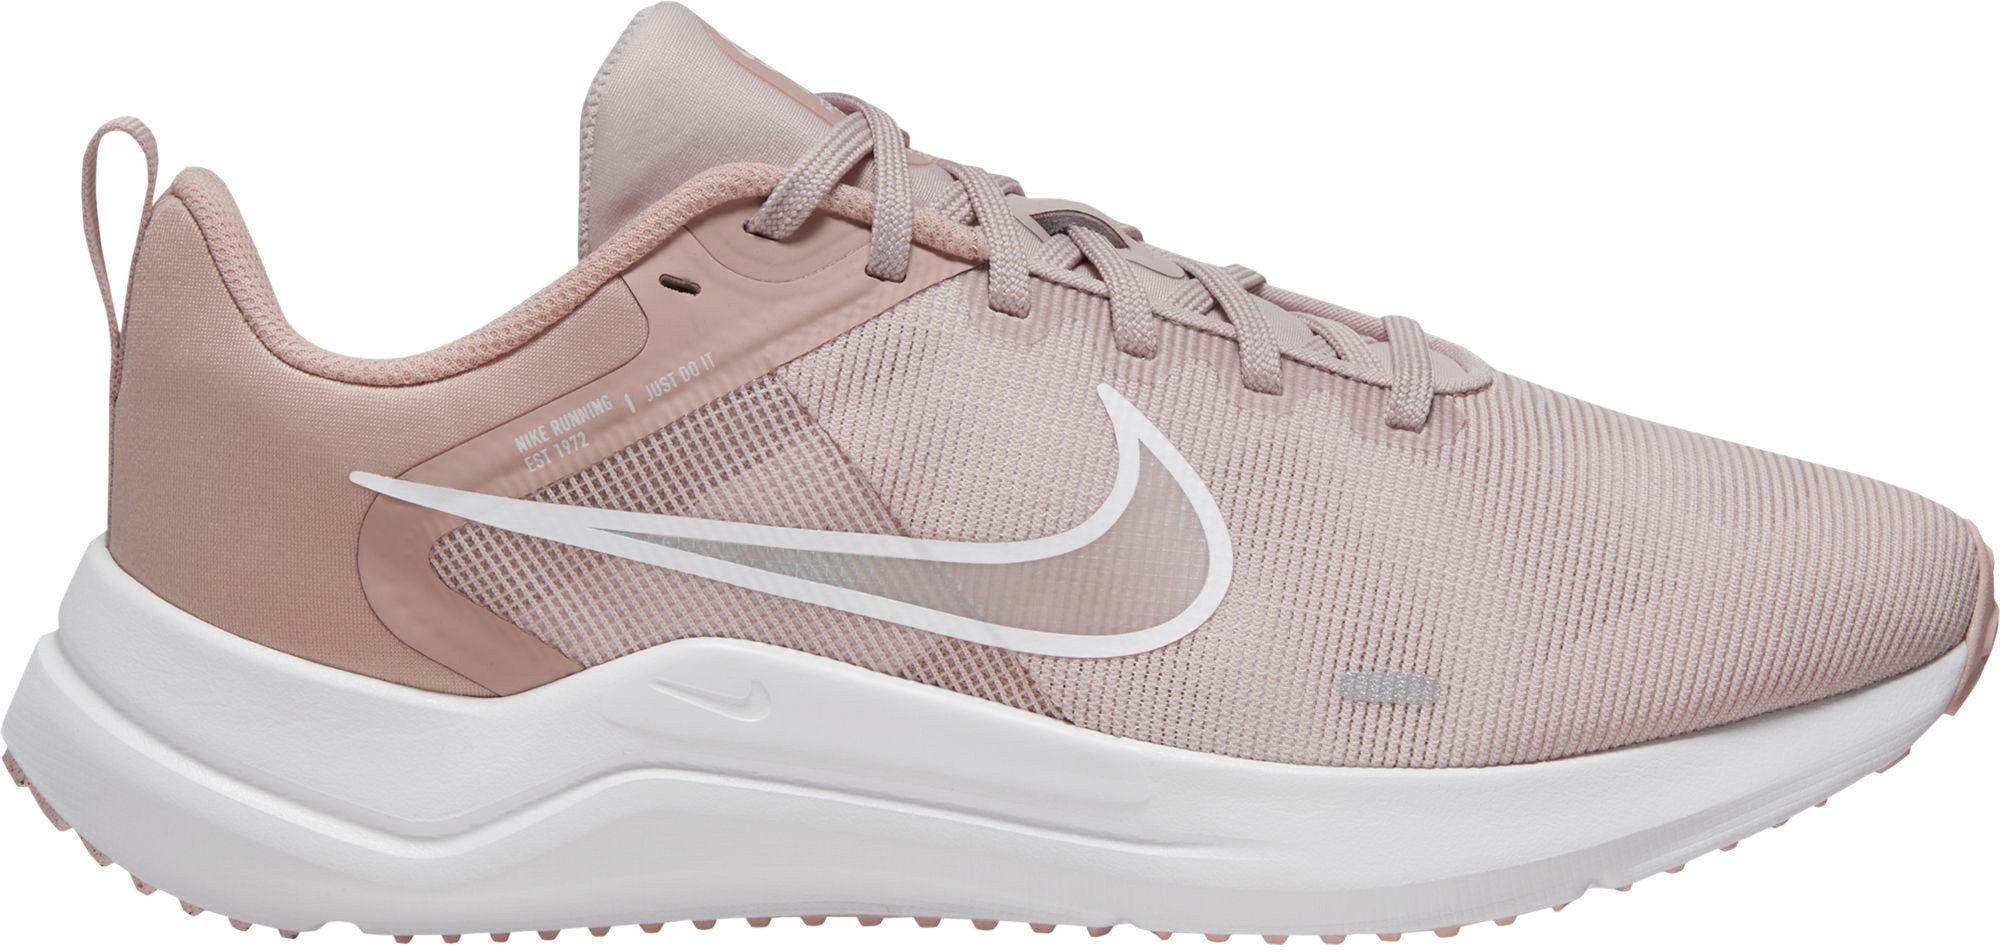 Laufschuh 12 BARELY-ROSE-WHITE-PINK-OXFORD Nike DOWNSHIFTER